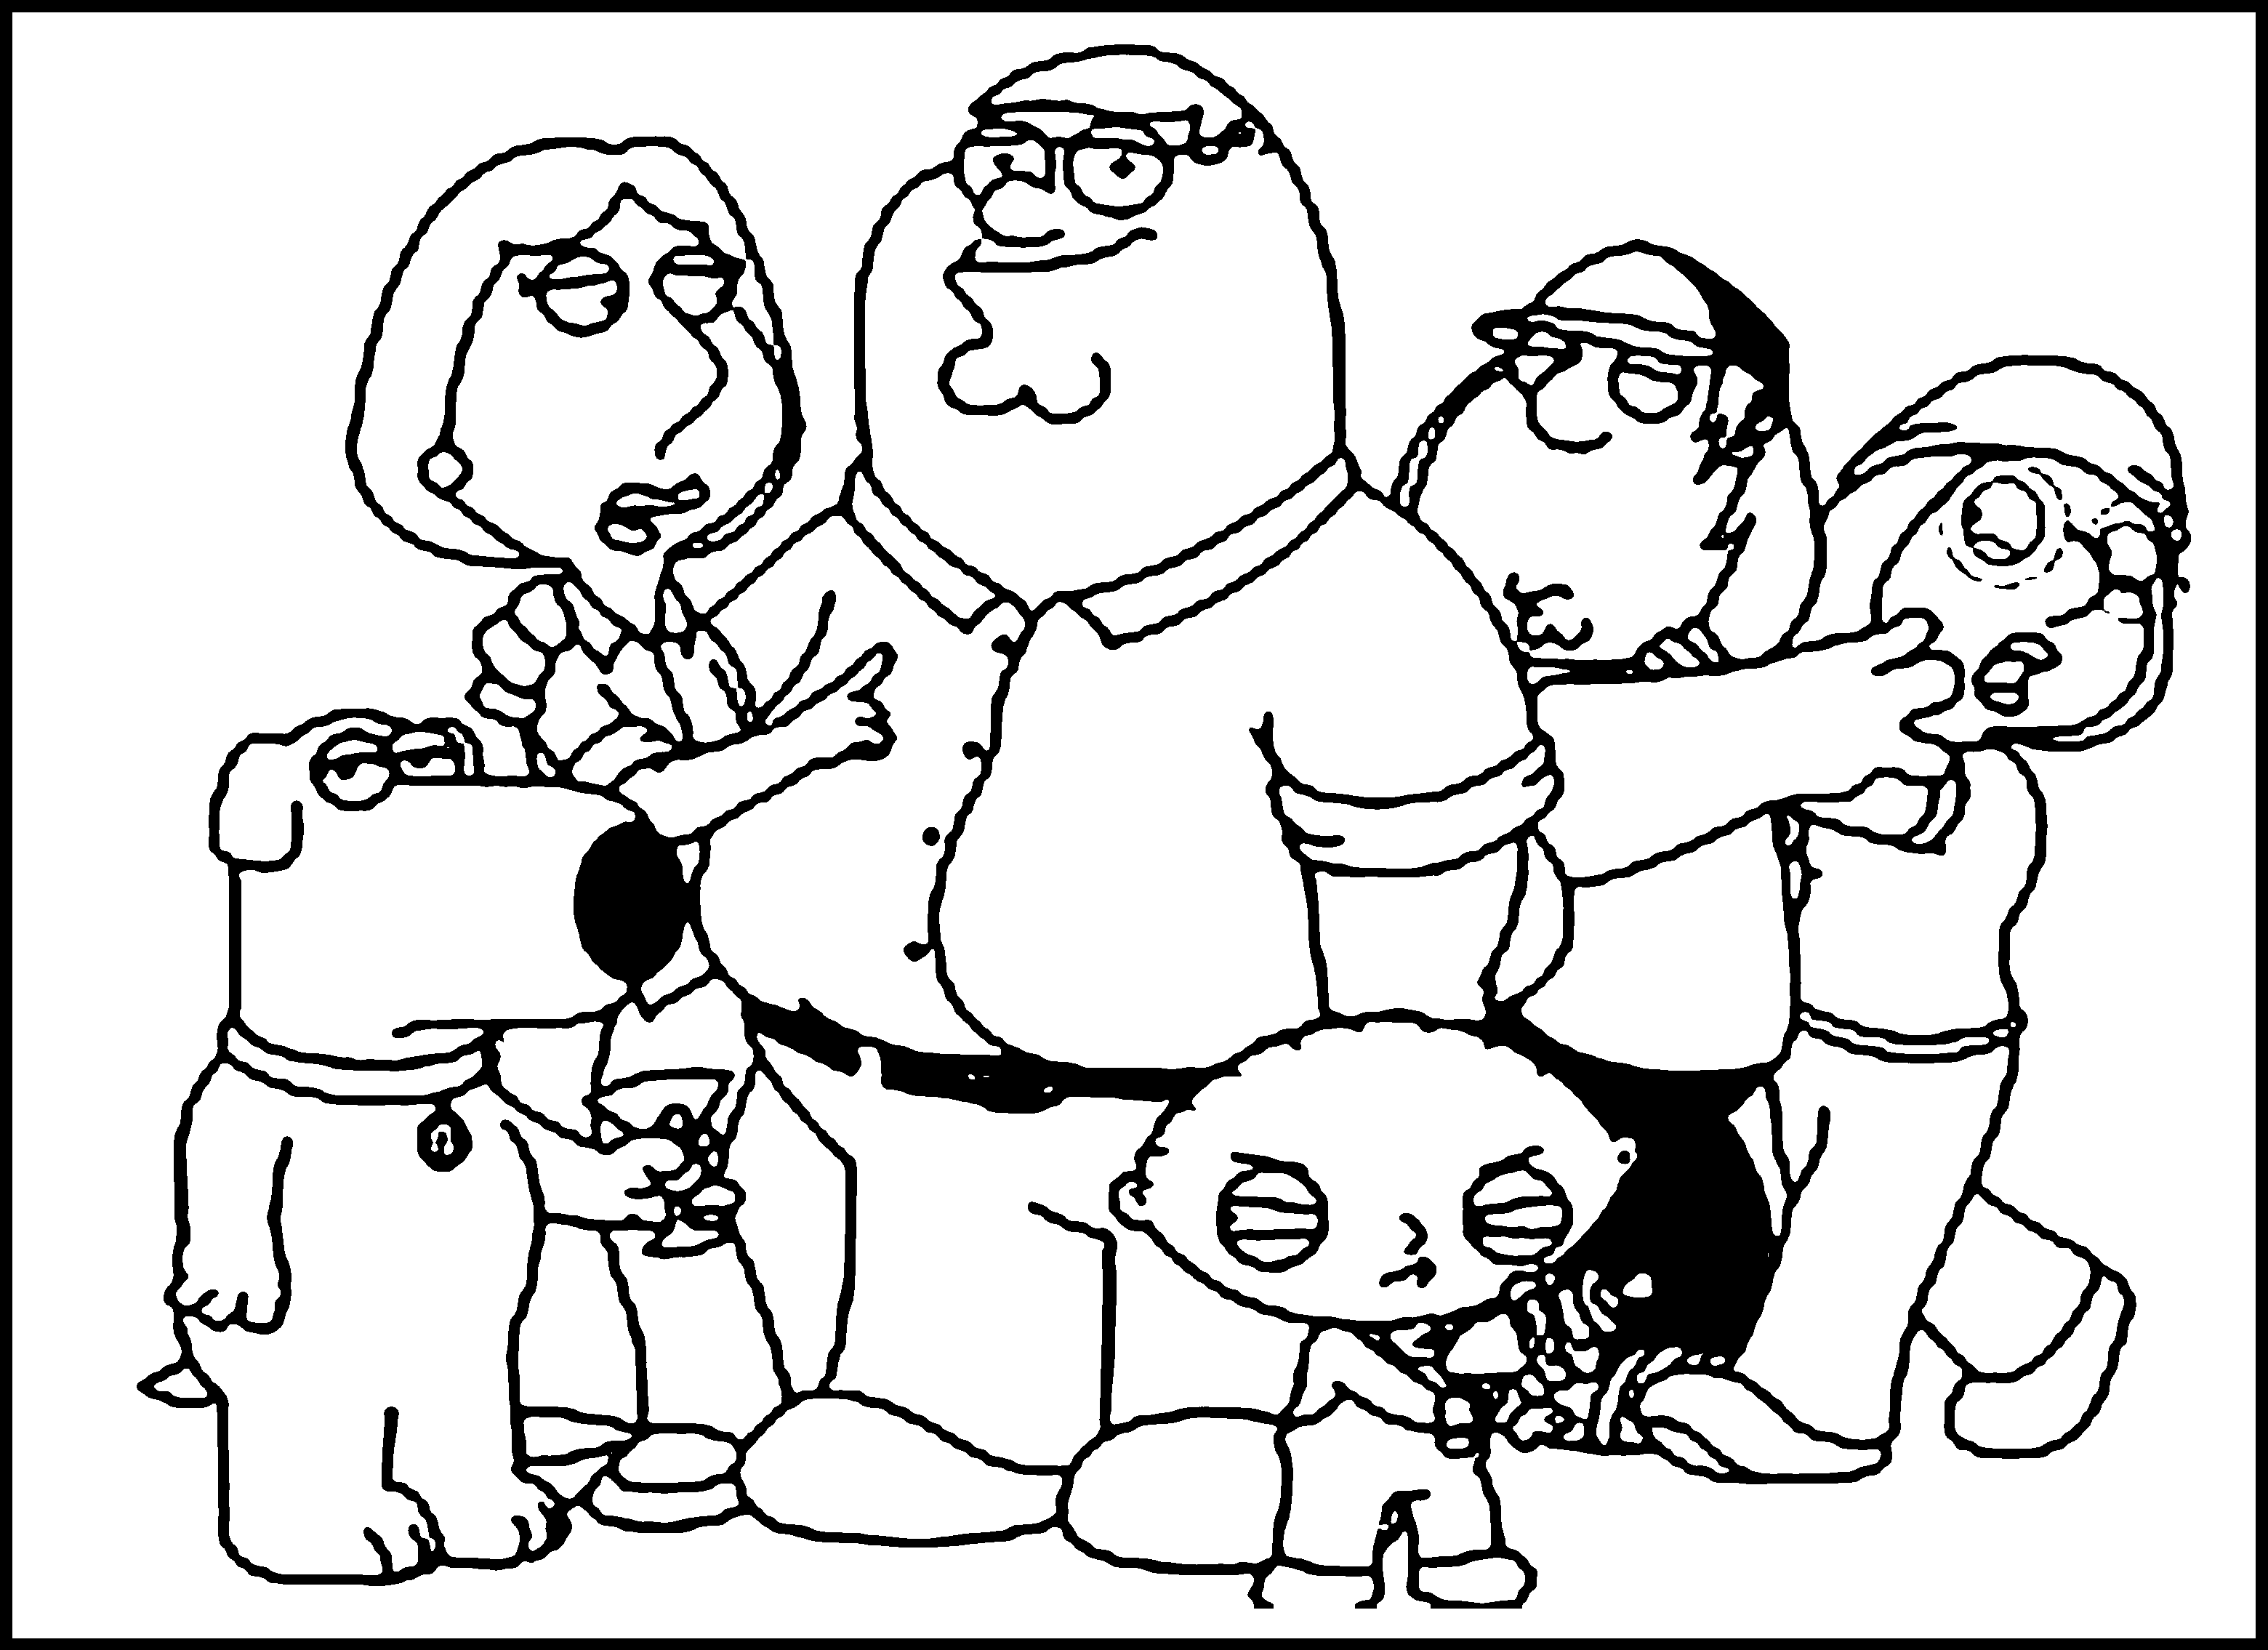  Family Coloring Pages For Kids 5